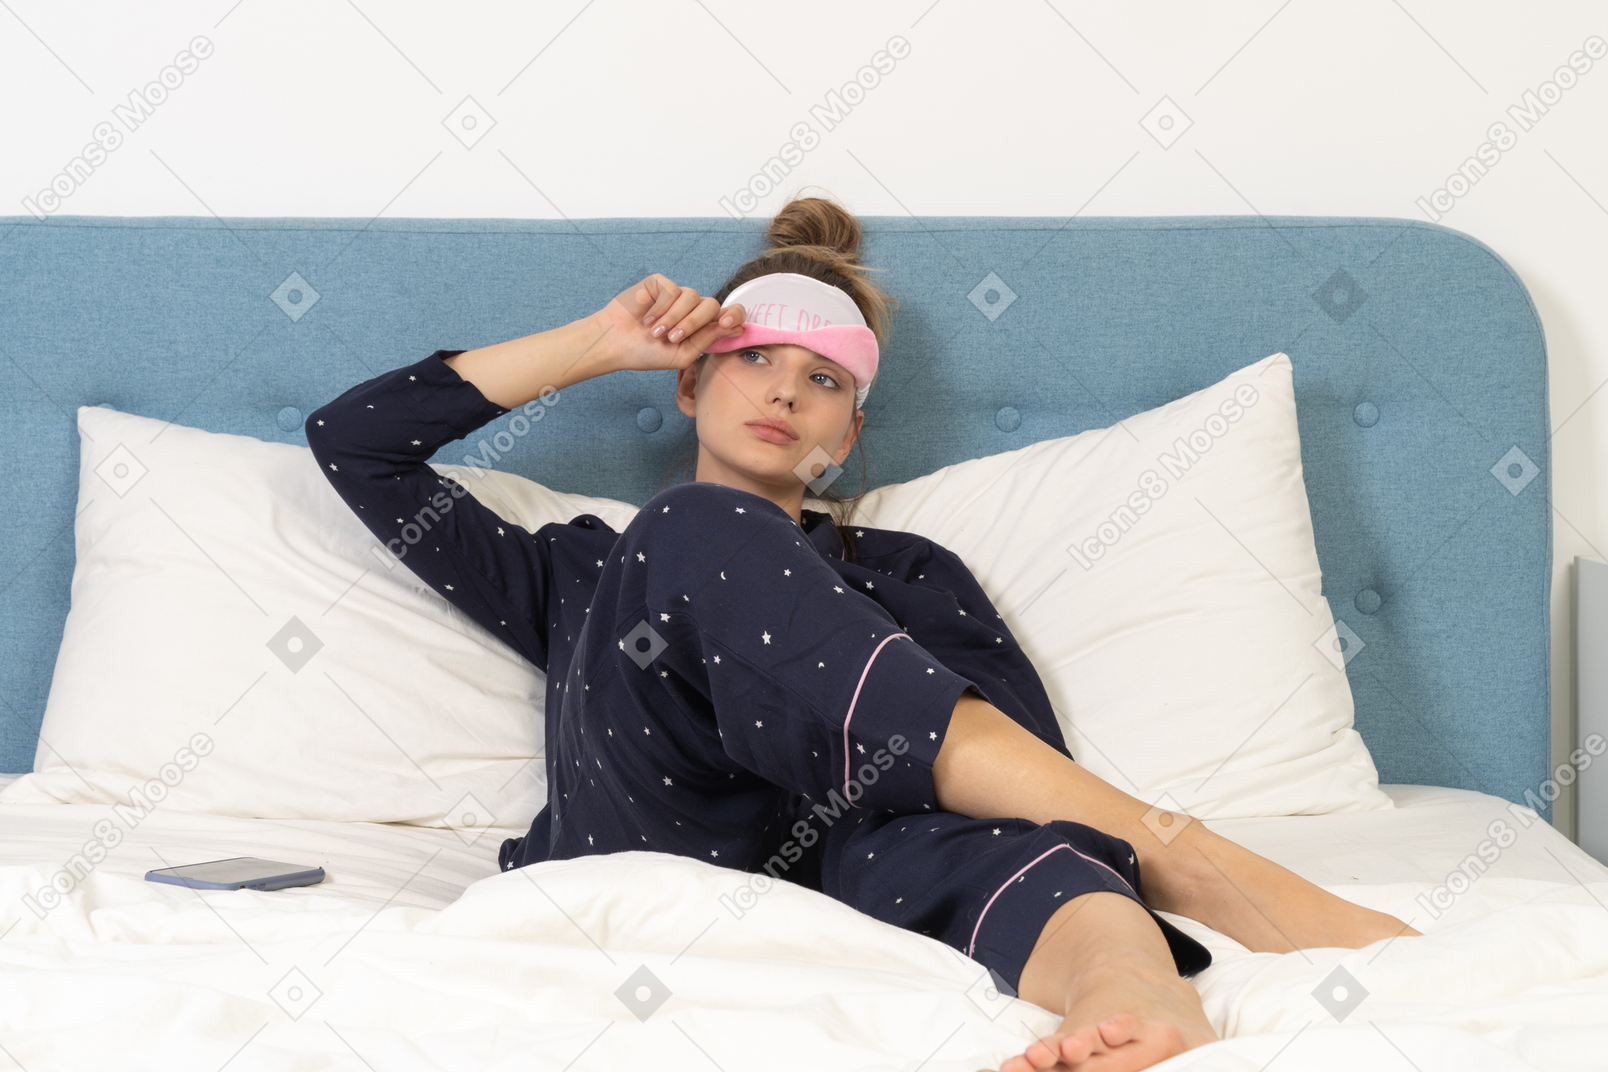 Front view of a laying young lady in pajamas putting on sleeping mask